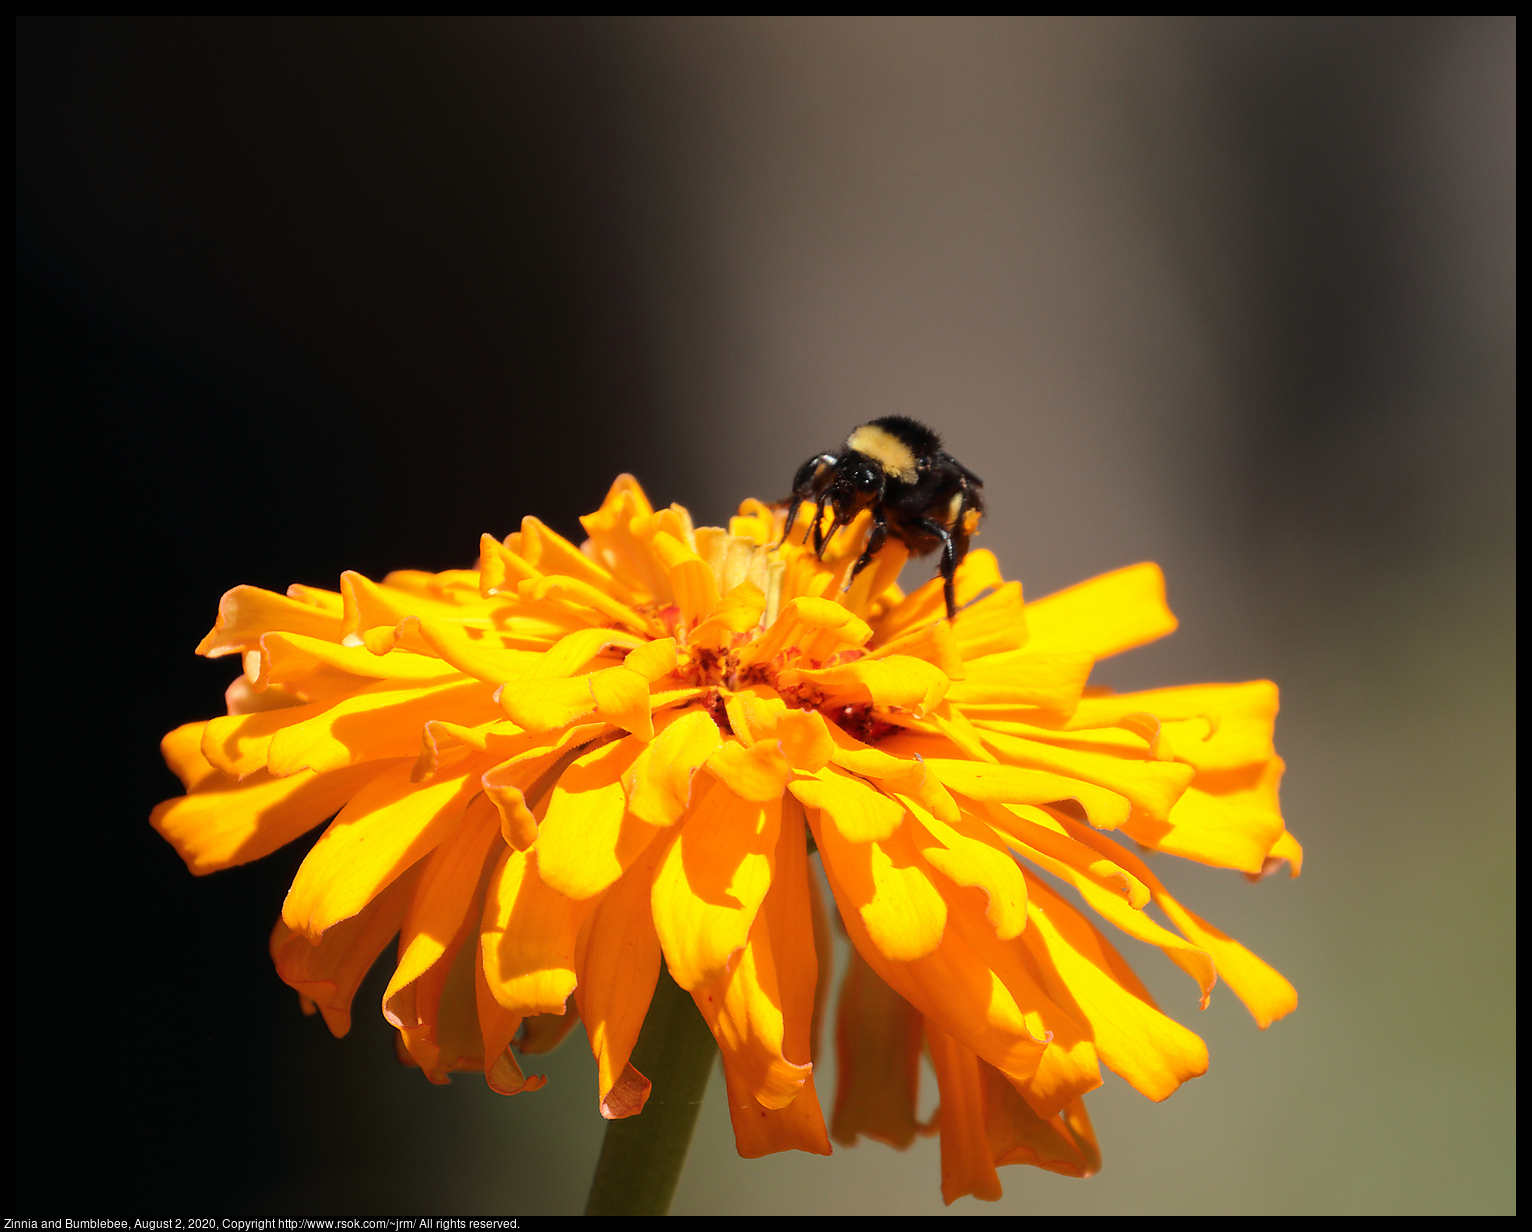 Zinnia and Bumblebee, August 2, 2020